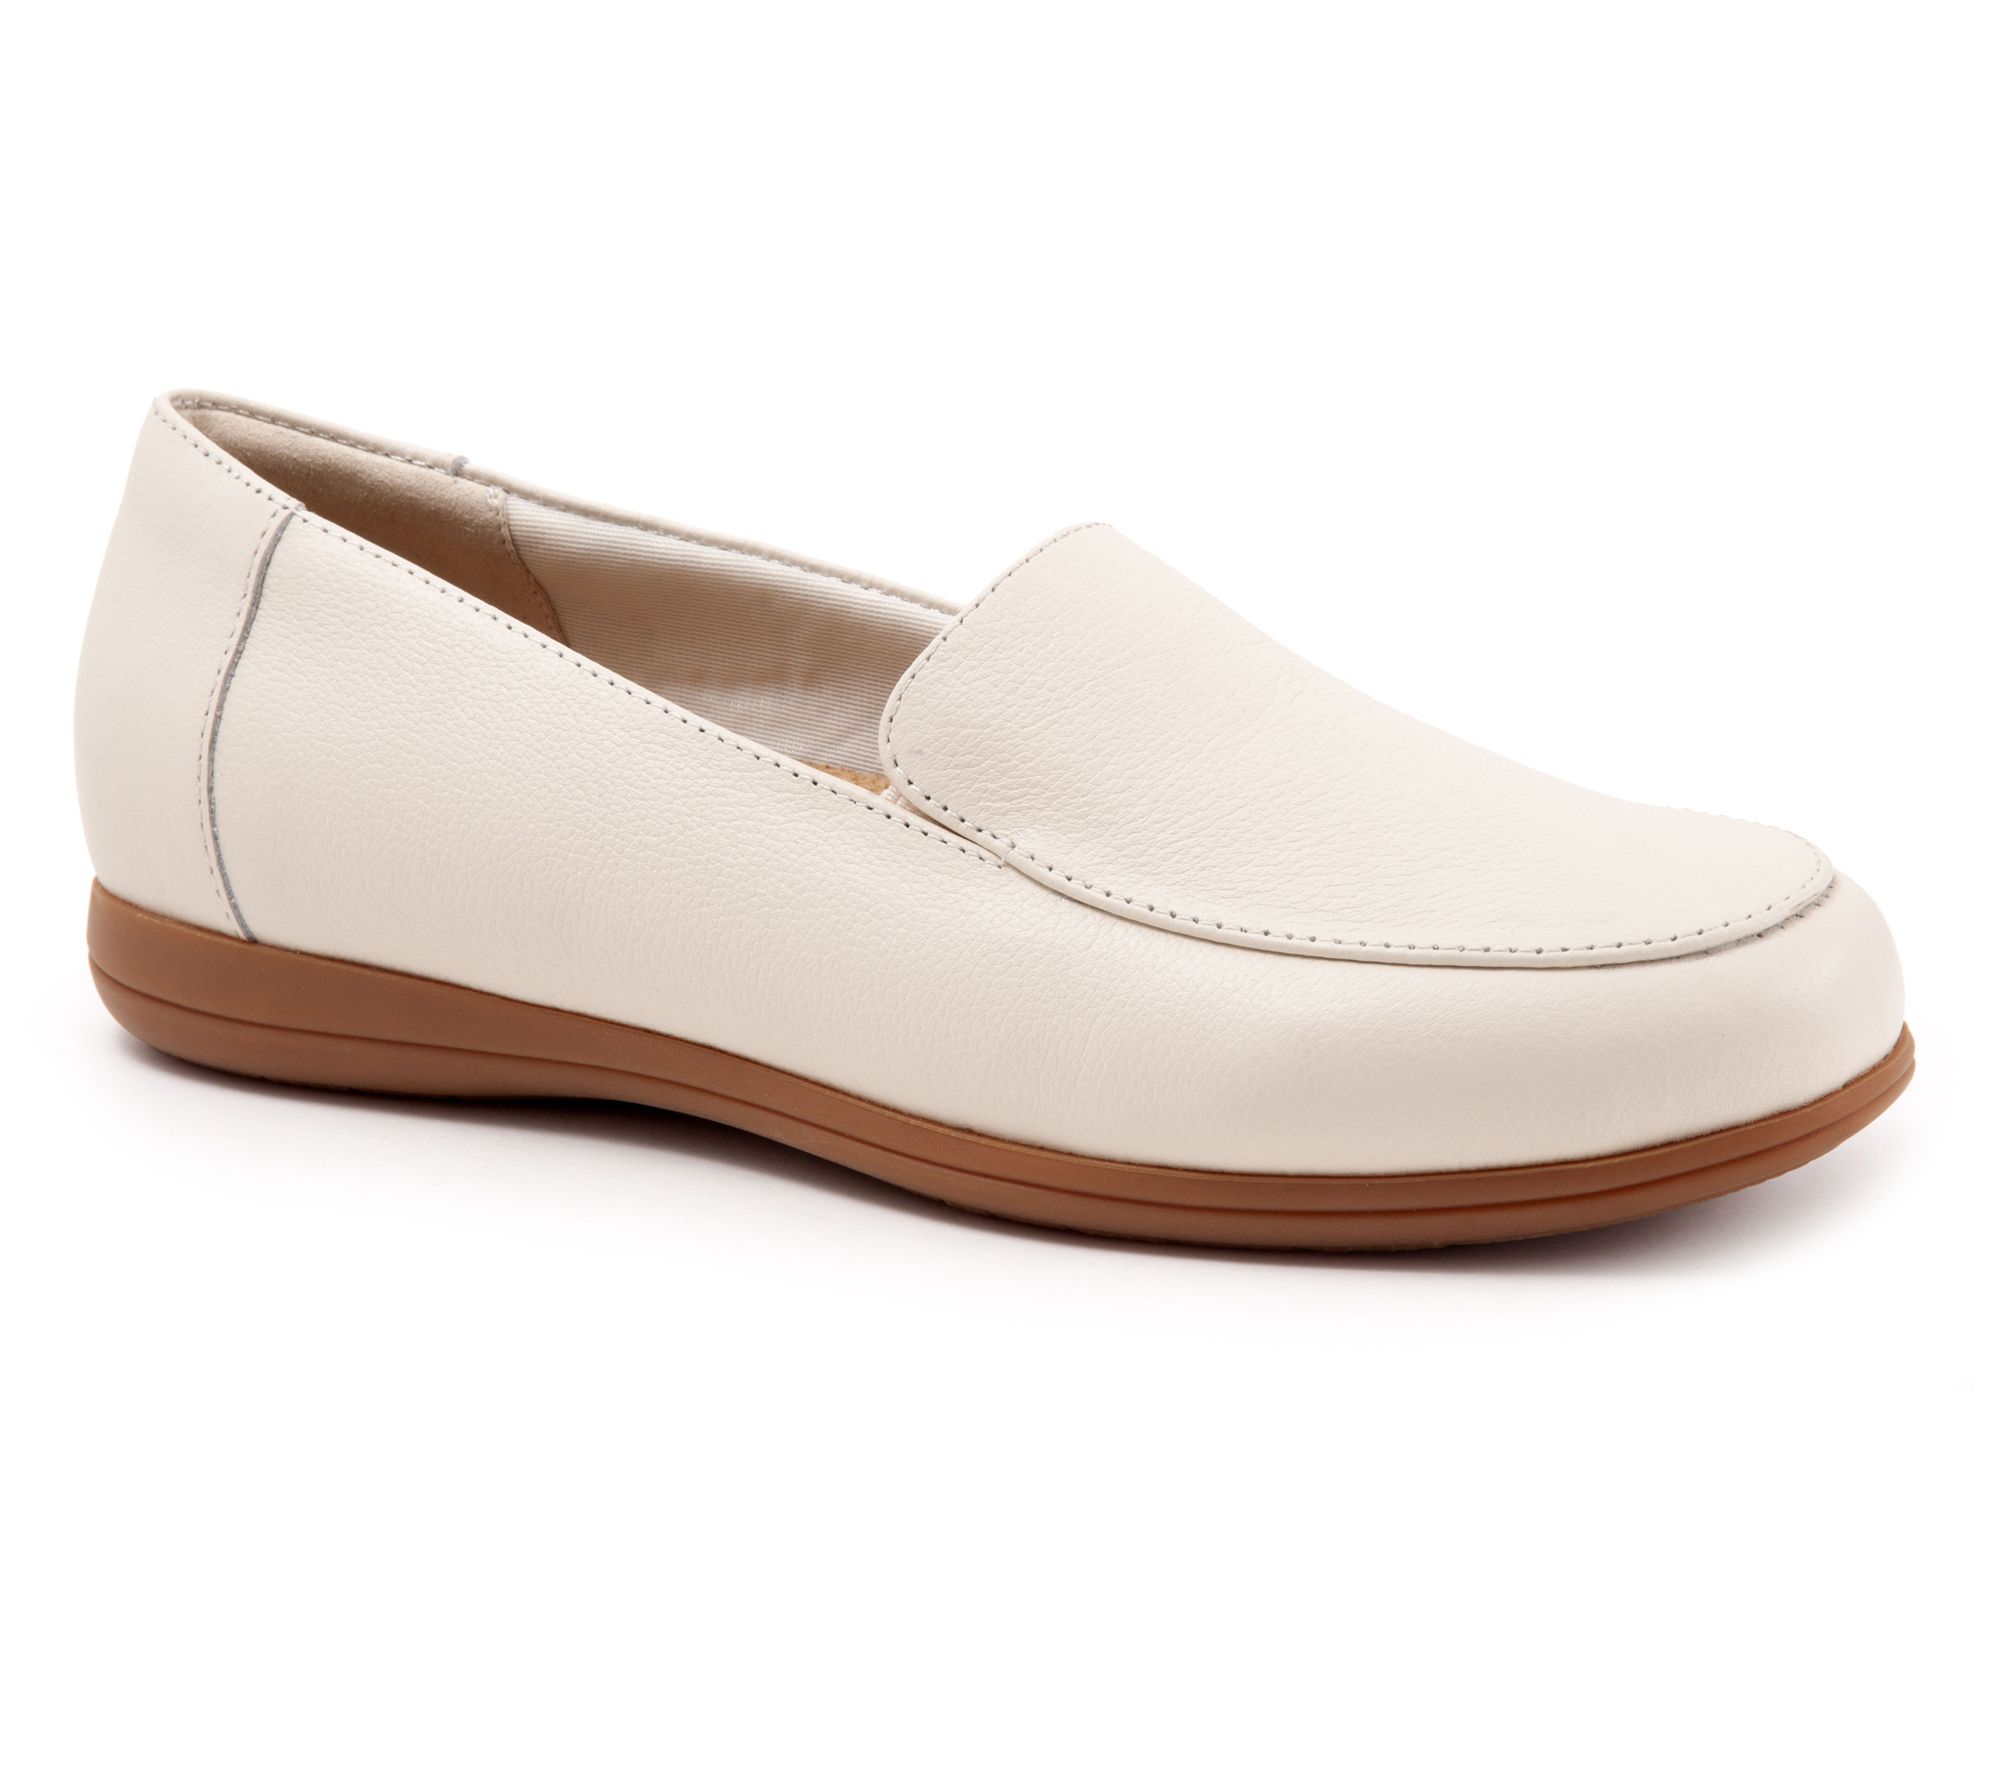 Trotters Women's Deanna Loafers - QVC.com